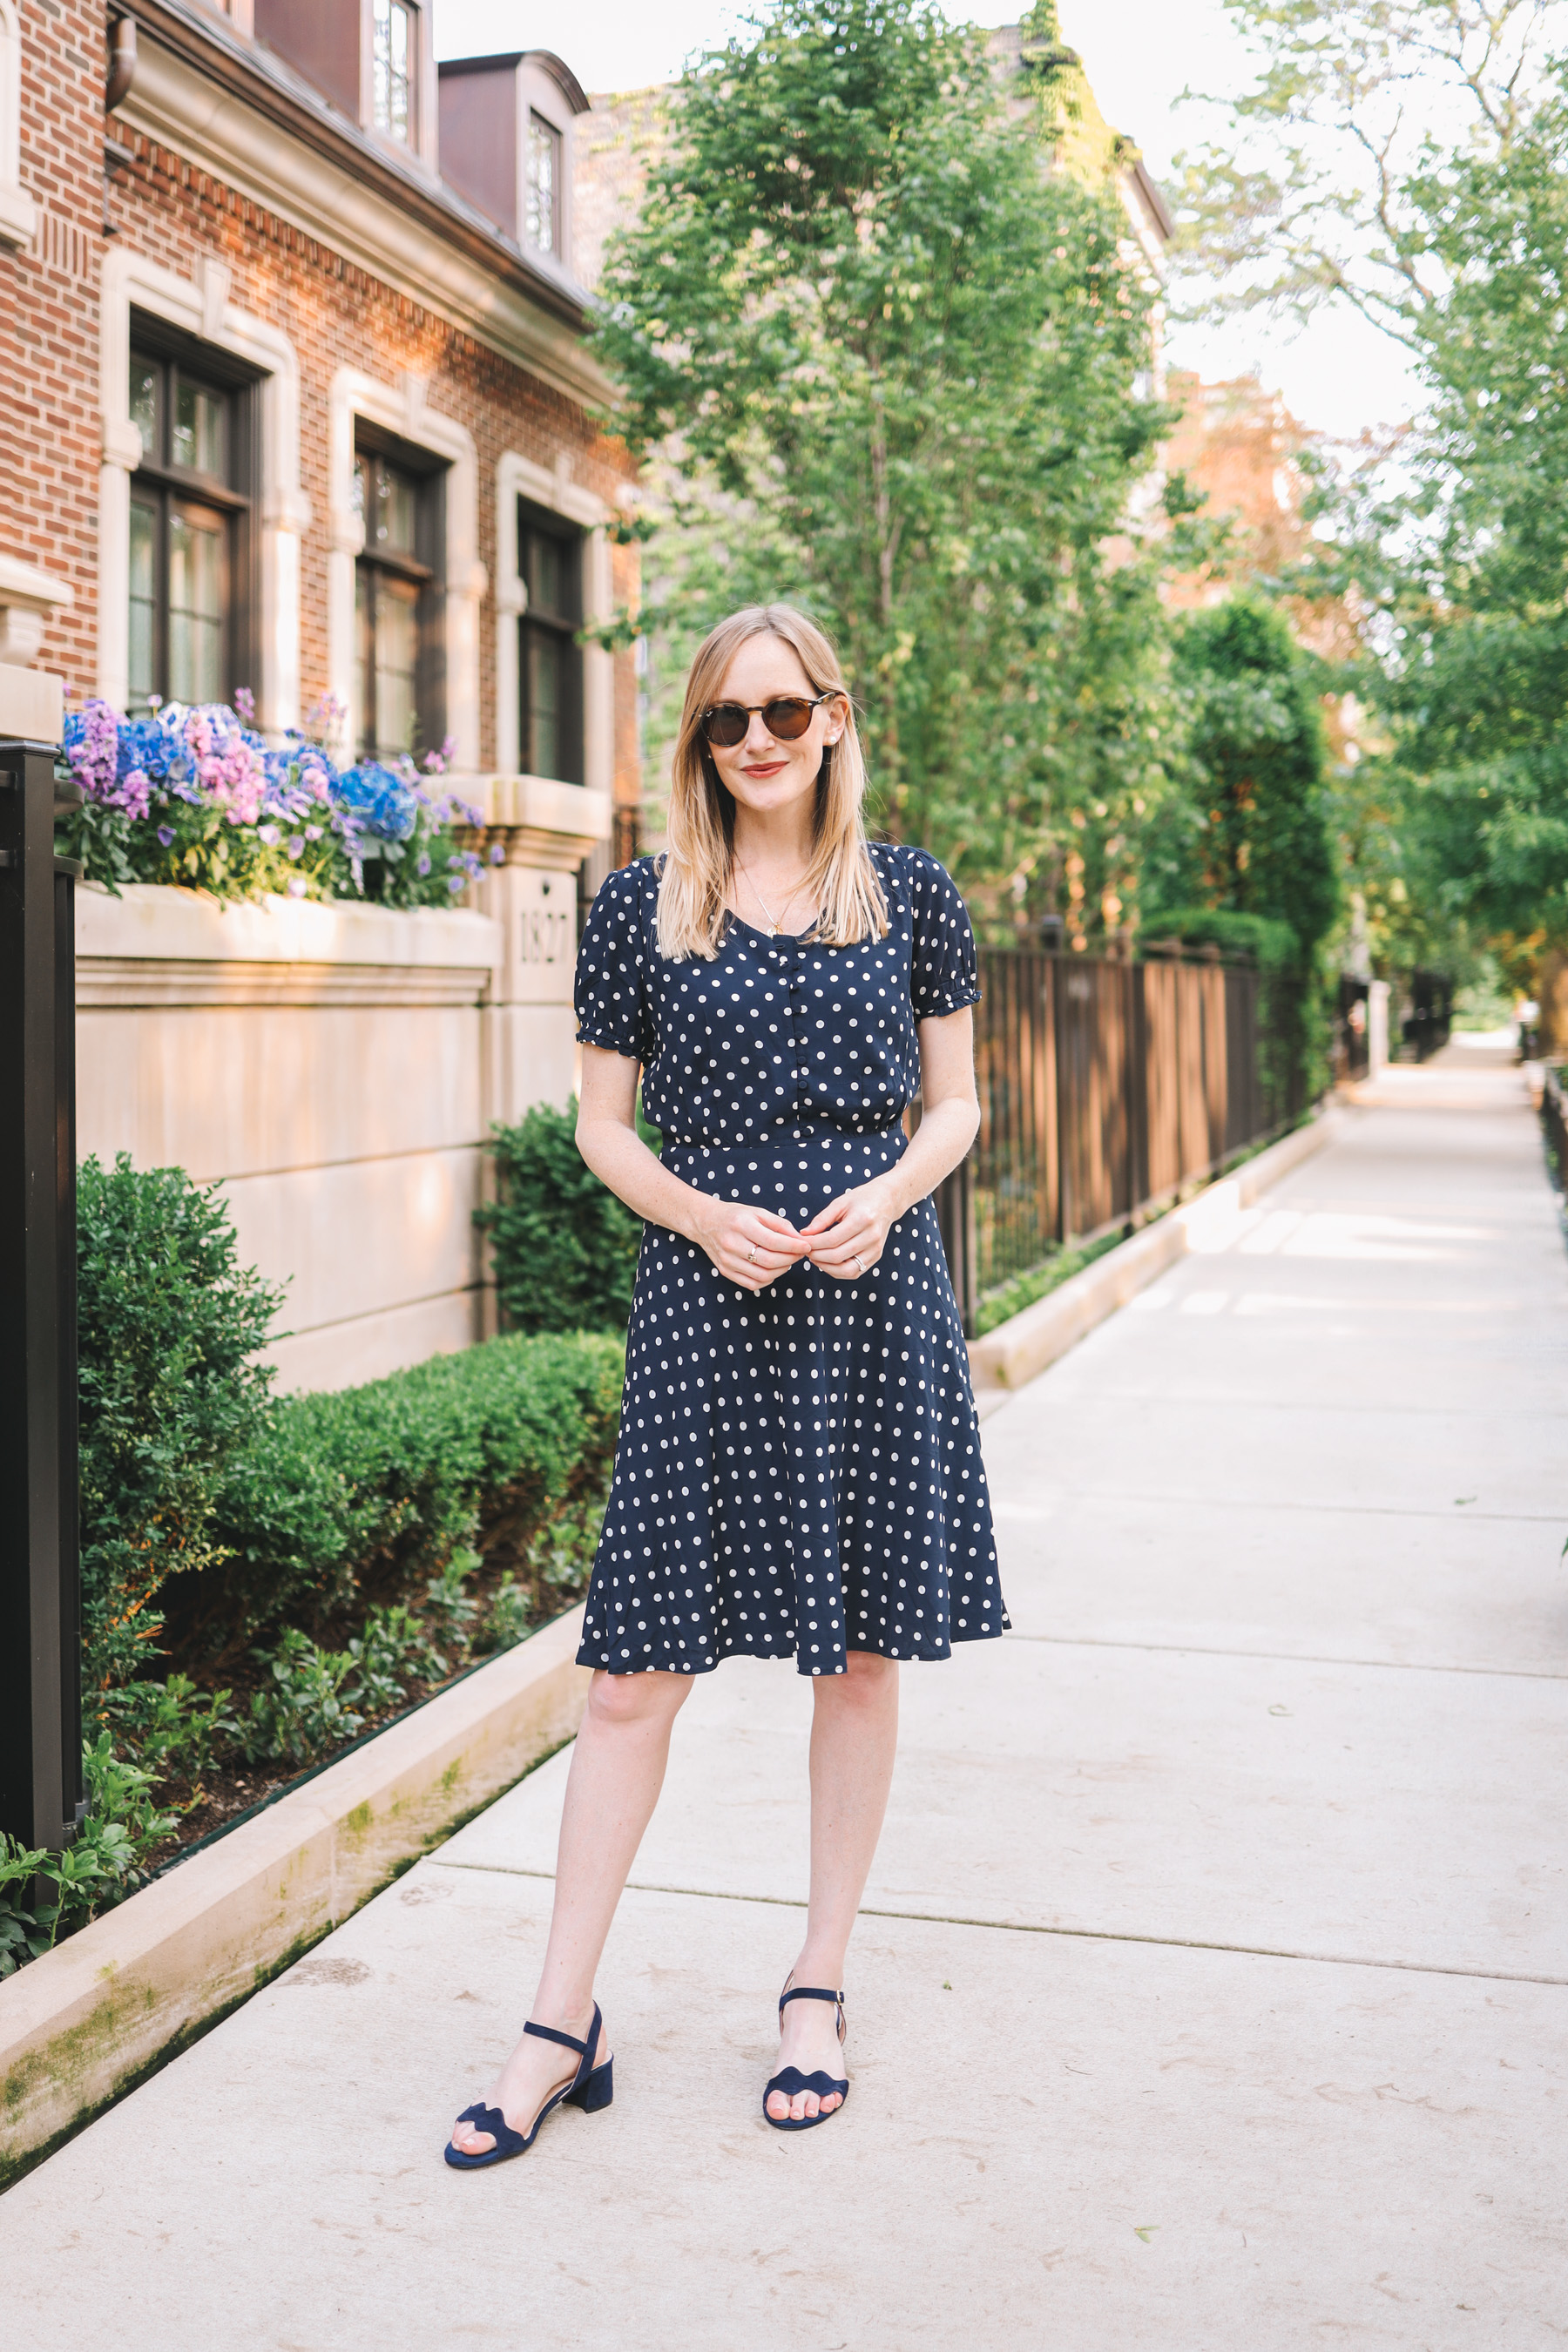 Kelly Larkin's outfit details: Navy Polka Dot Dress / Patricia Green Scalloped Sandals / Stampled Initial Necklace 